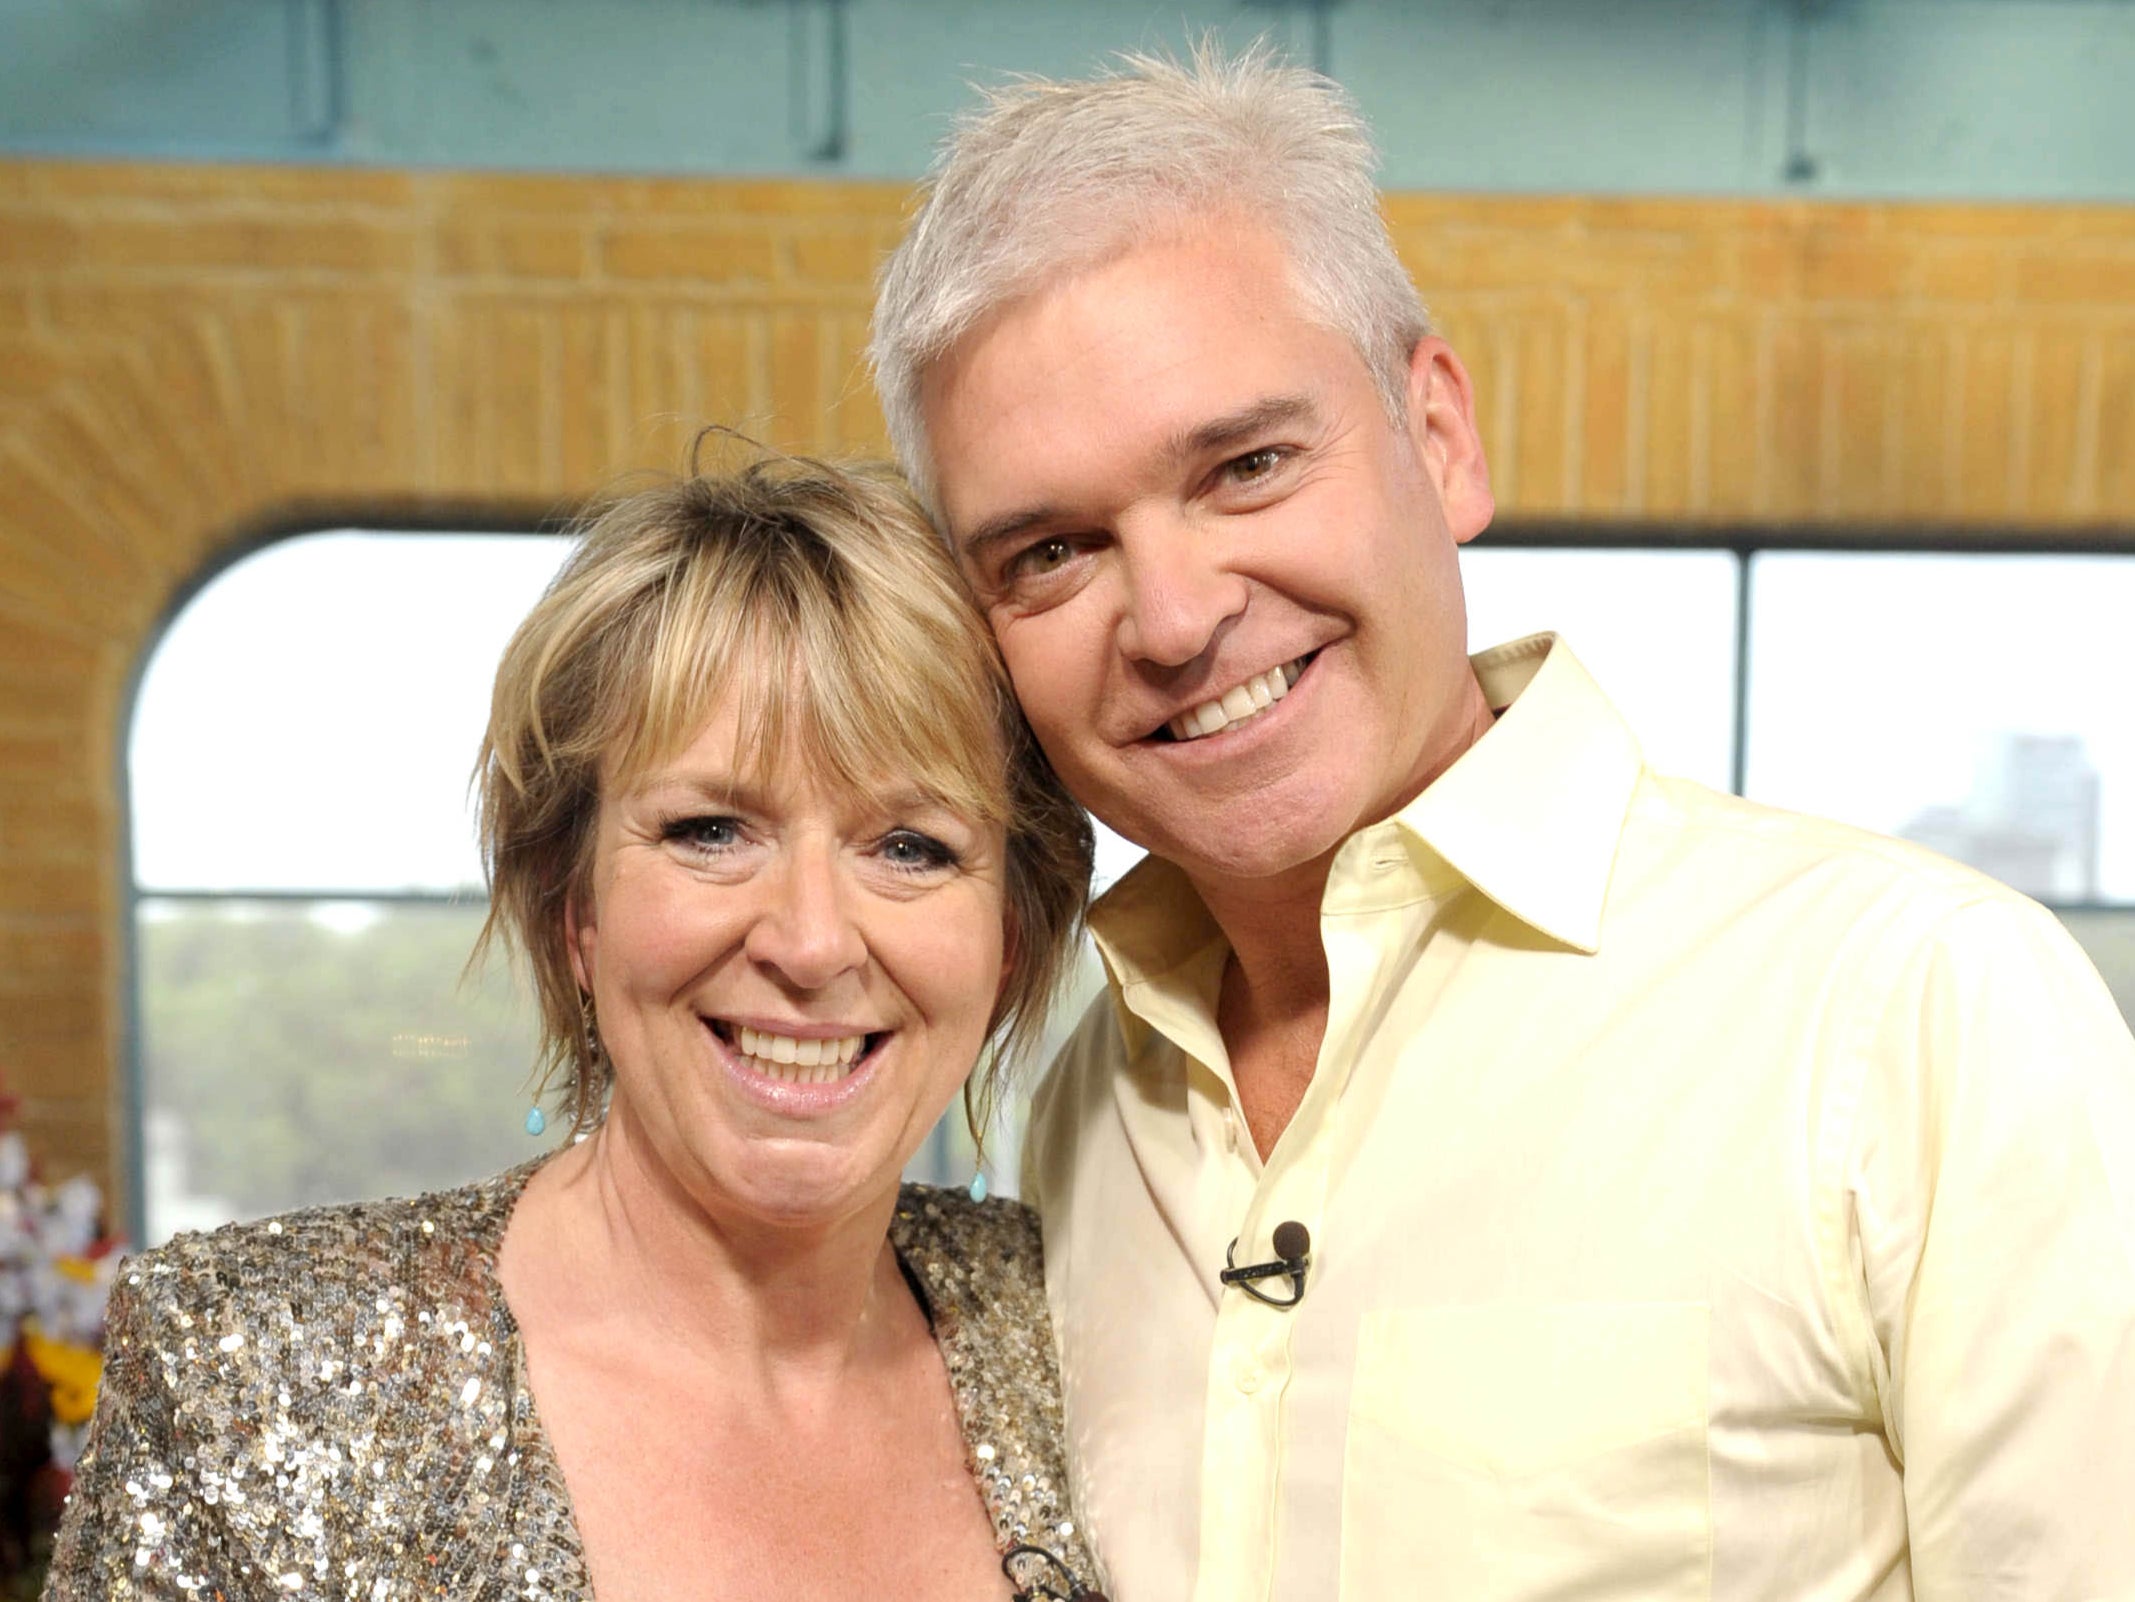 Former co-hosts Fern Britton and Phillip Schofield on ‘This Morning’